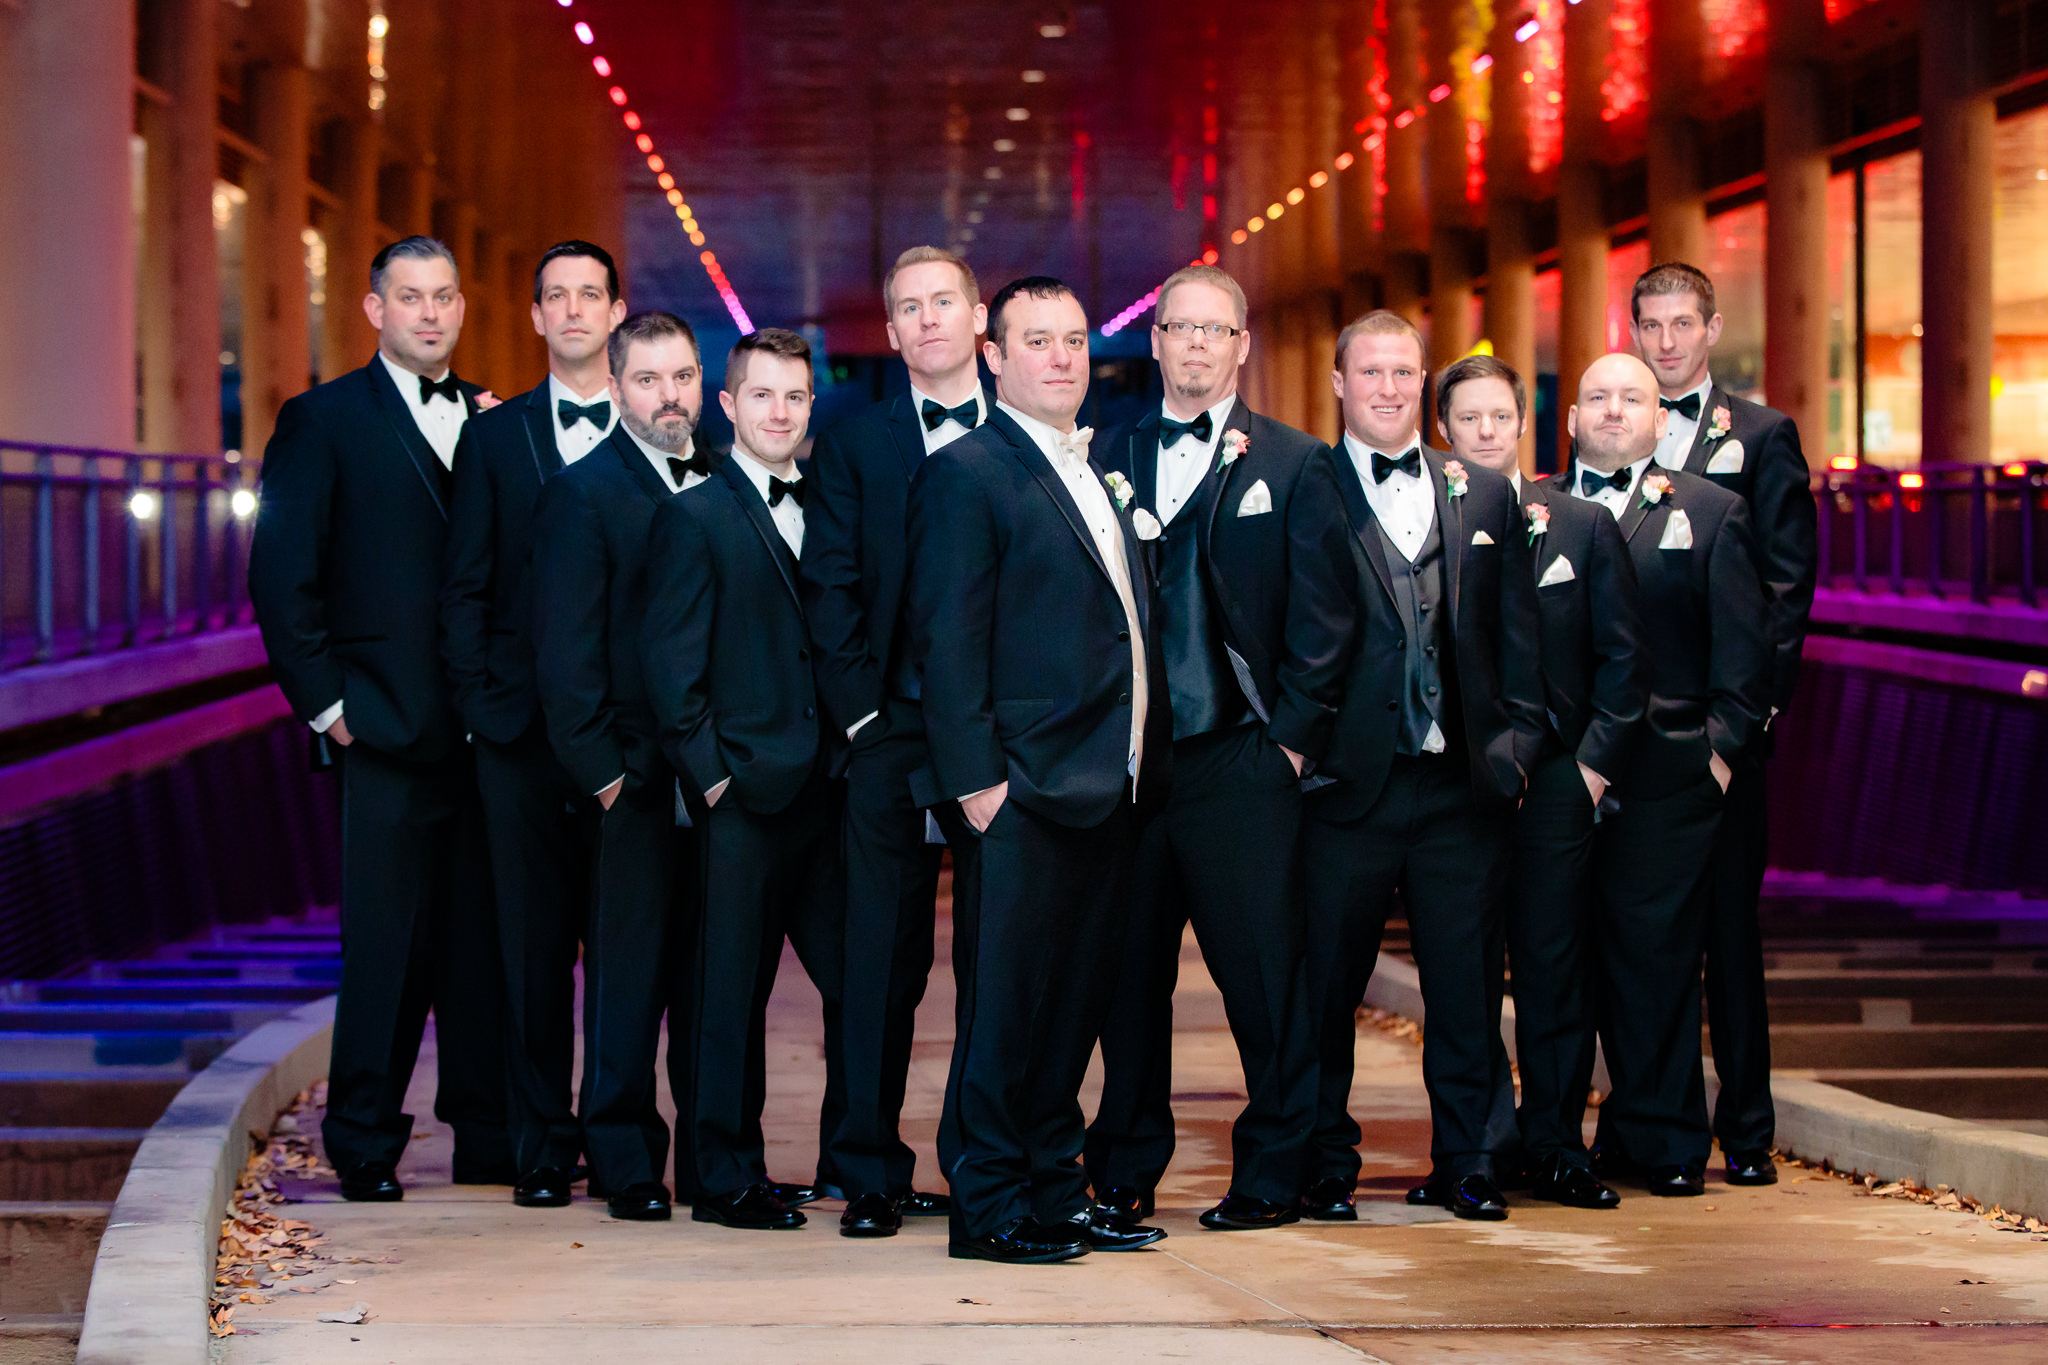 Groom and groomsmen under the David L. Lawrence Convention Center in Pittsburgh